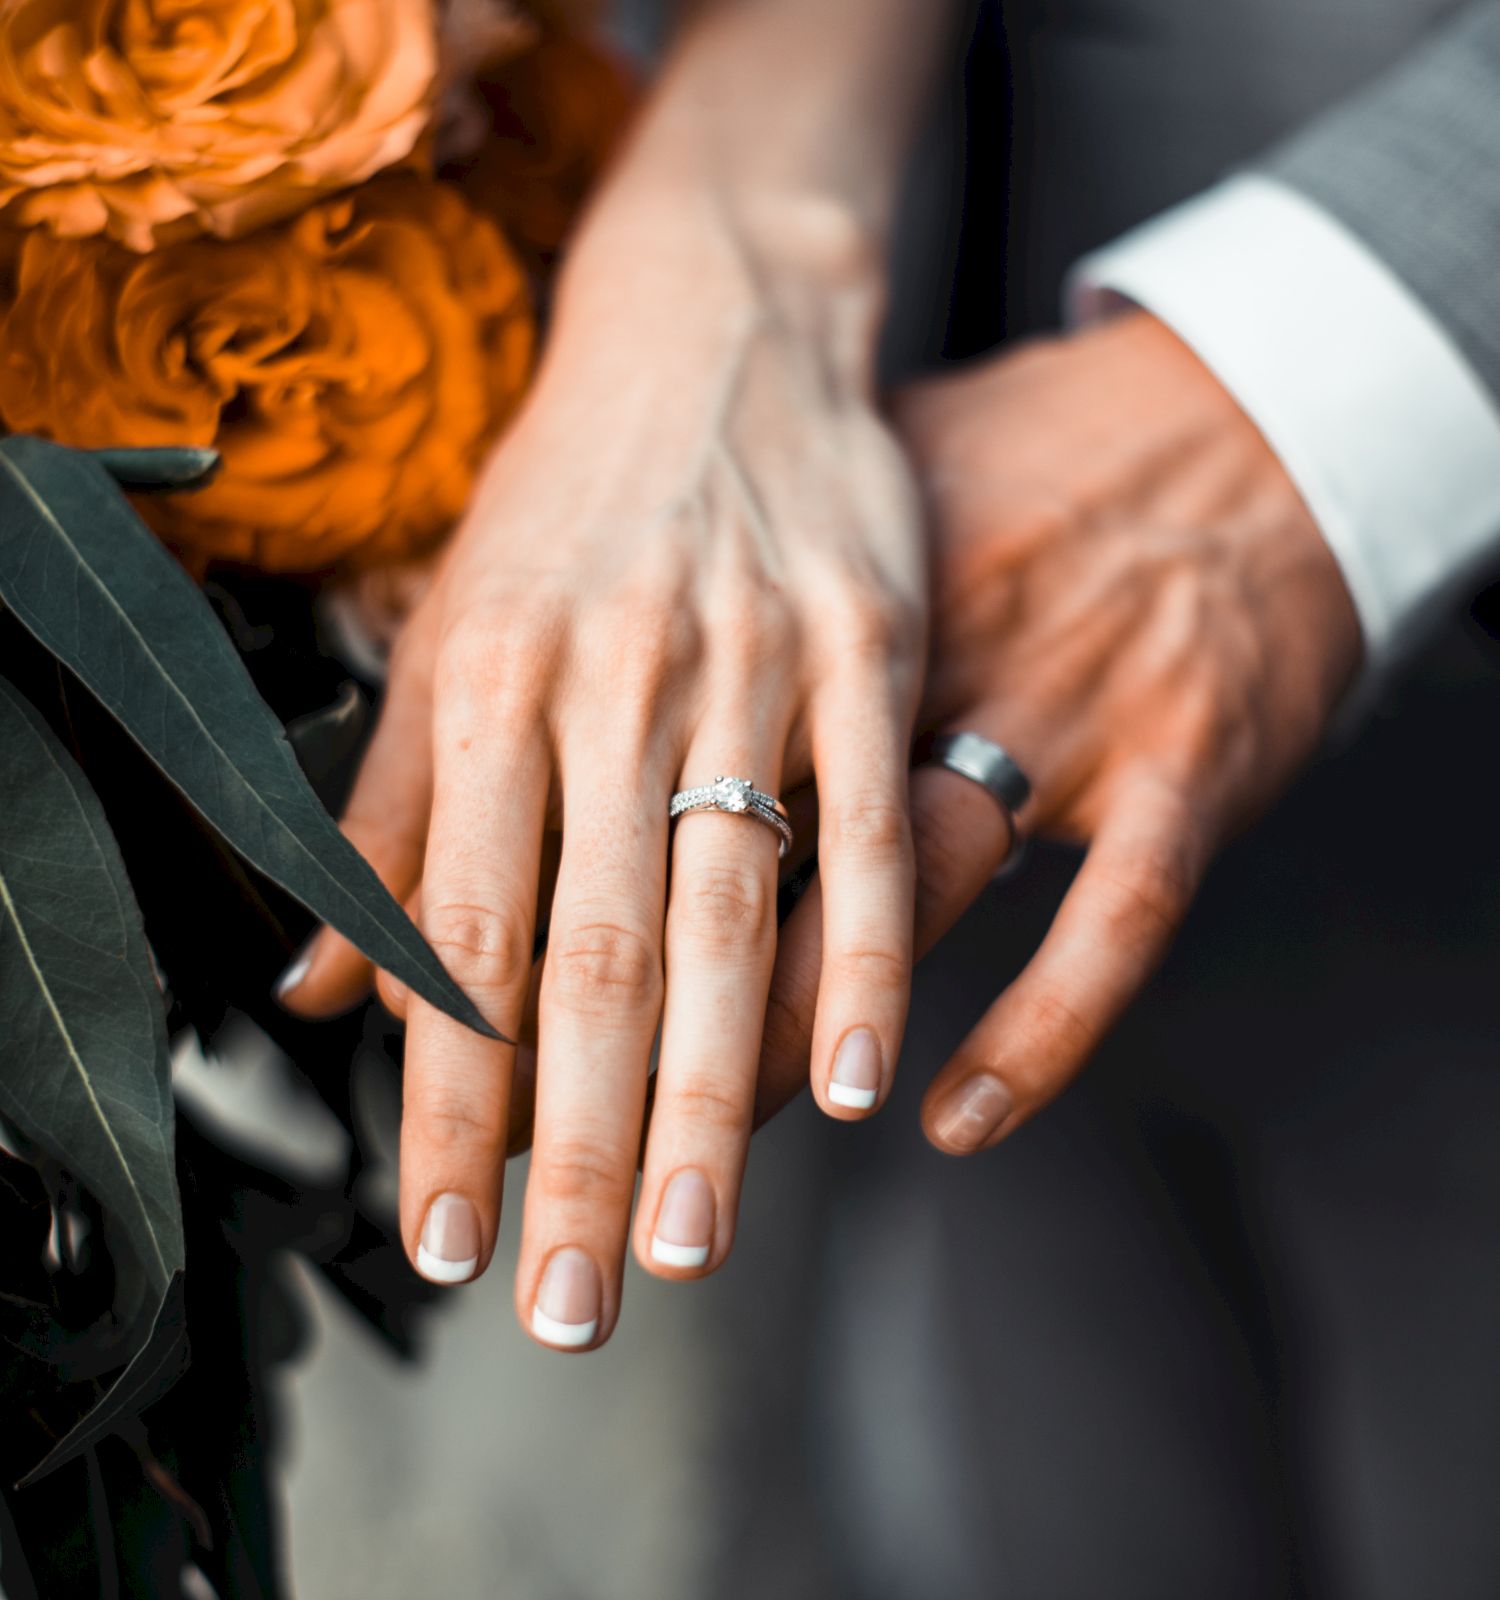 Two hands displaying wedding rings, joined together with flowers in the background. A symbol of love and commitment.